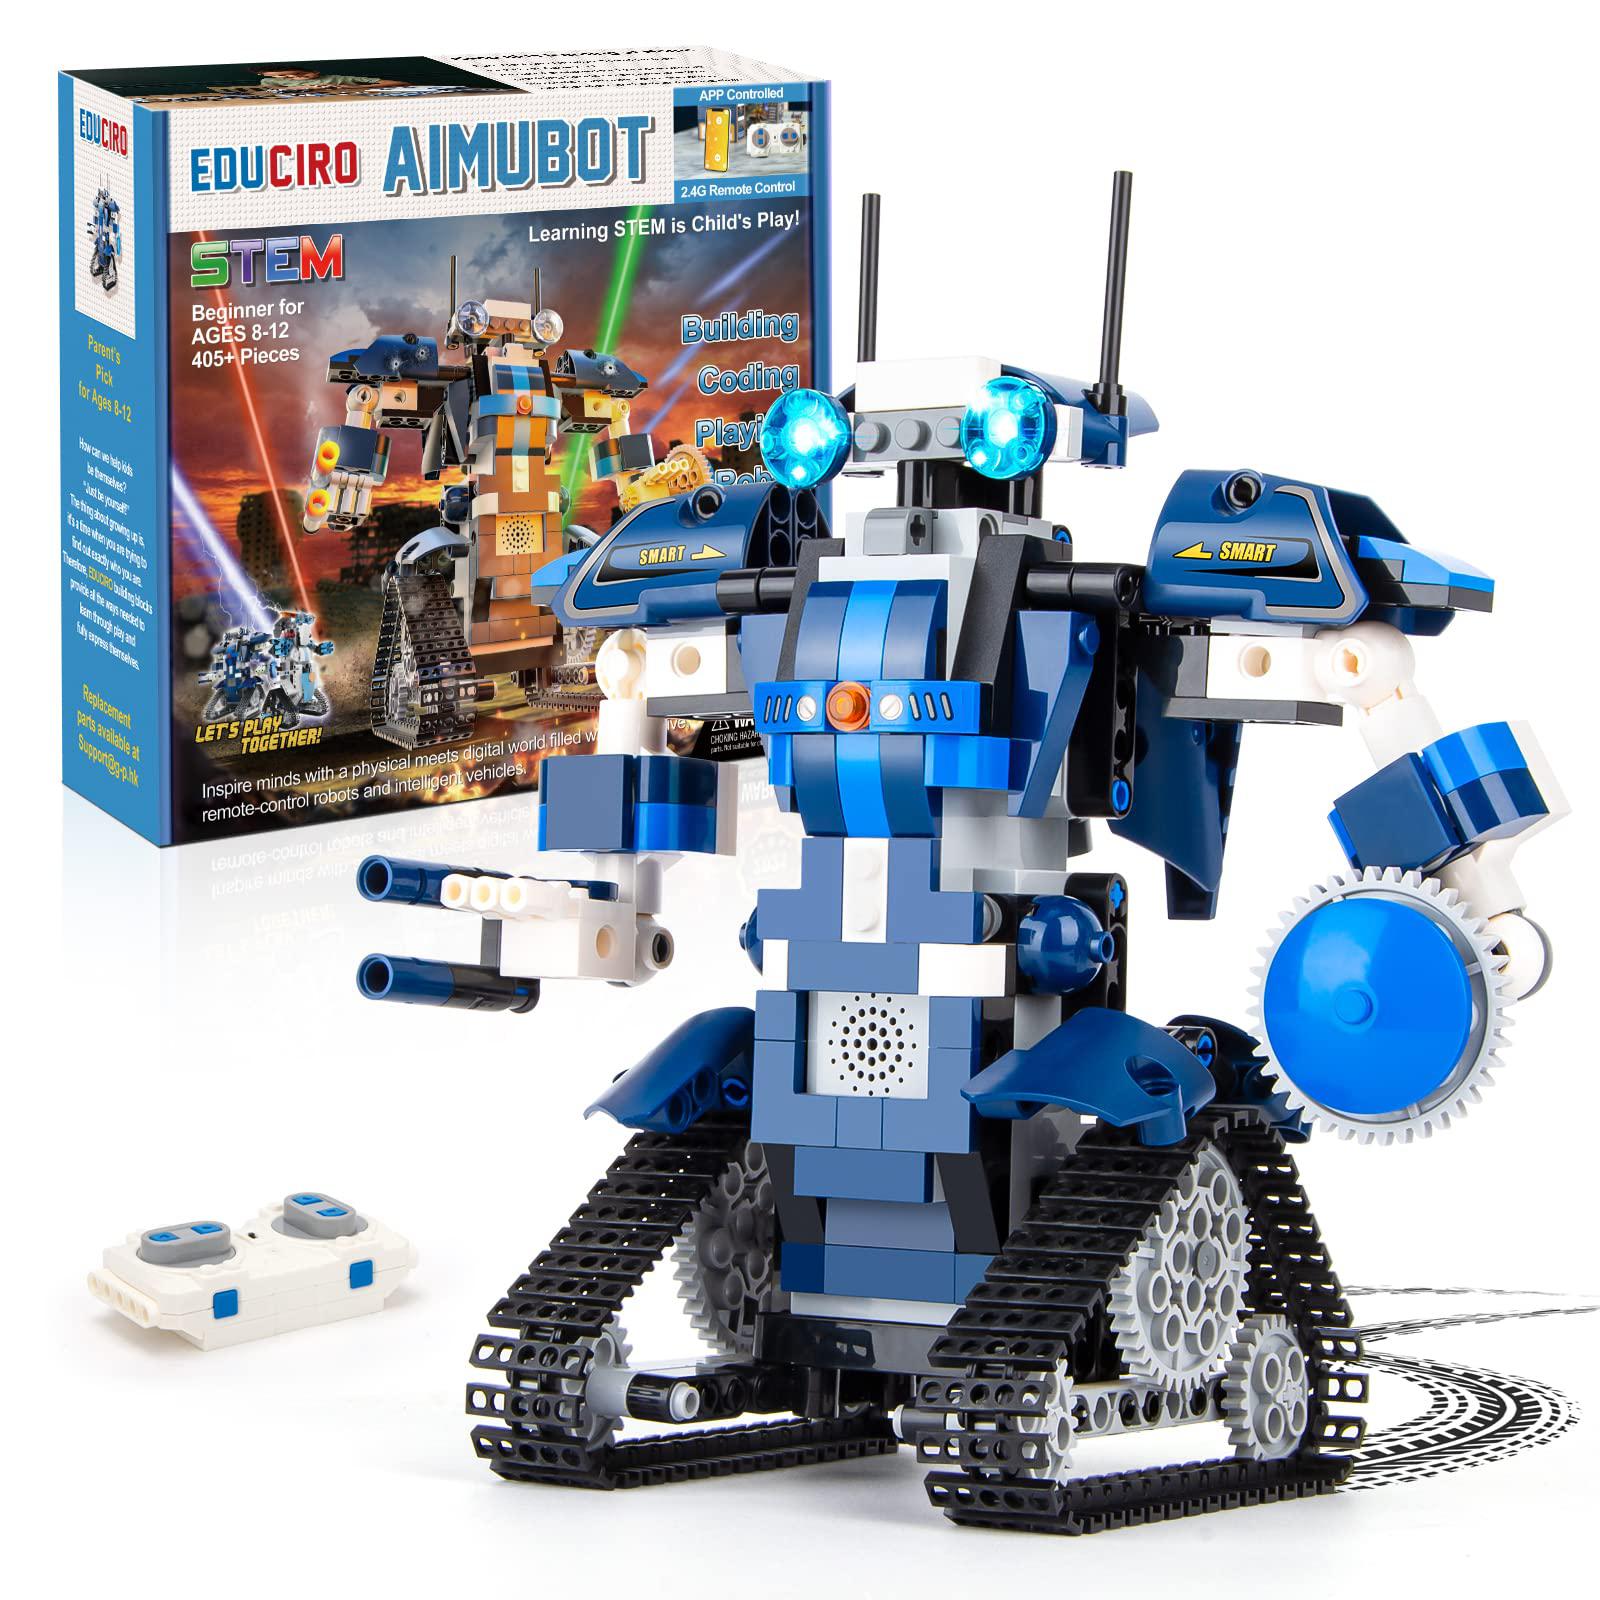 GP TOYS educiro robot building kit, toys for 6-12 year old boys girls, stem projects birthday gifts idea for kids 8 9 10 11 12 year o